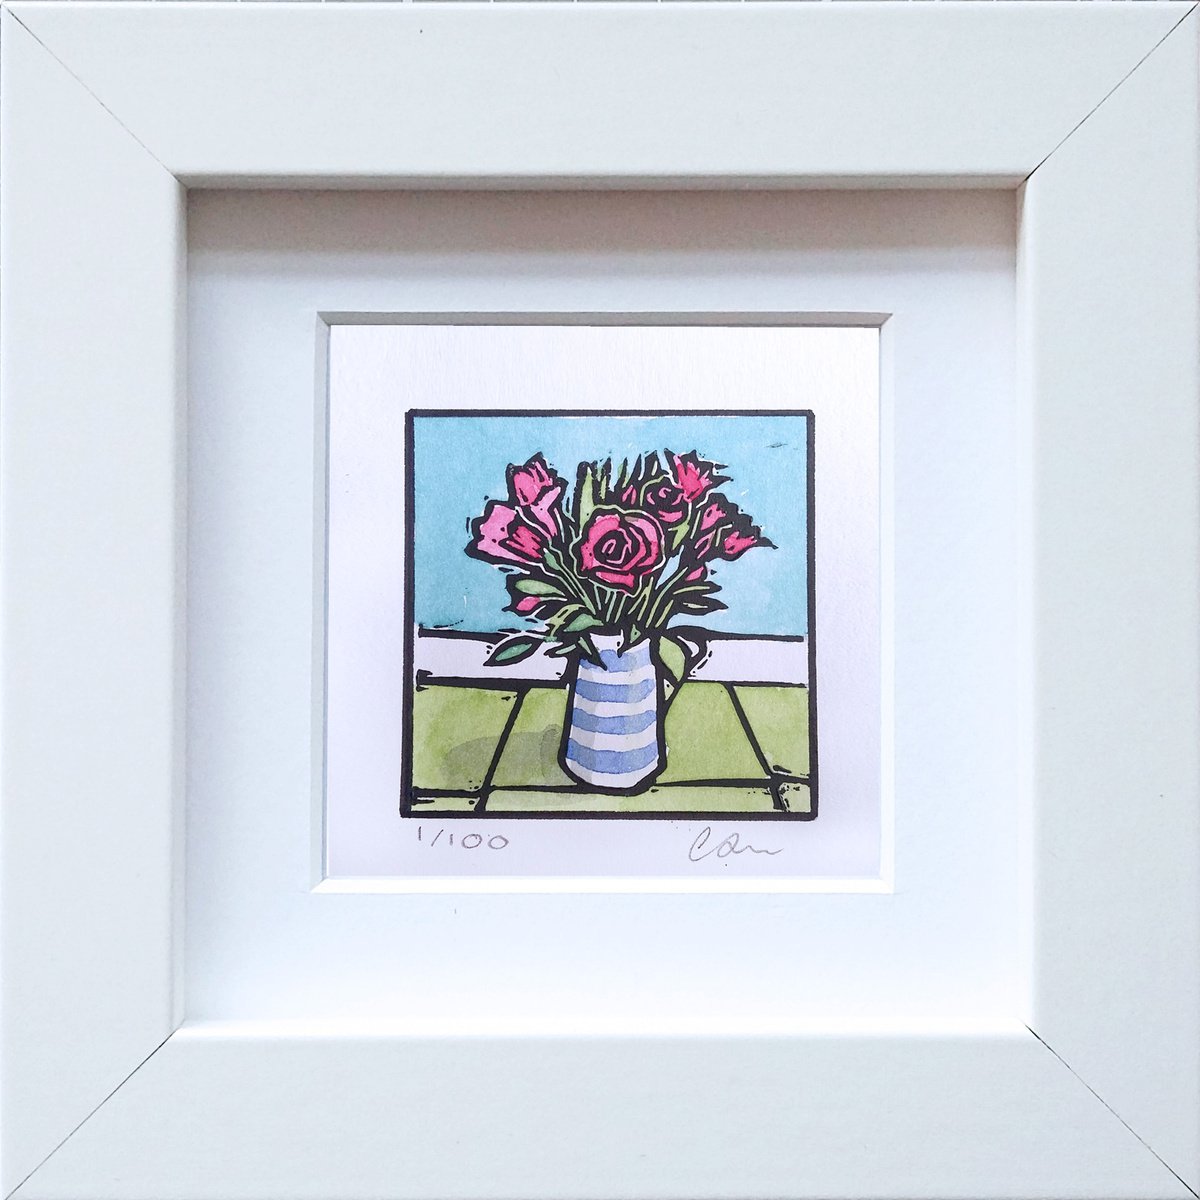 China jug of flowers - Framed and ready to hang - miniature variable edition linocut print by Carolynne Coulson